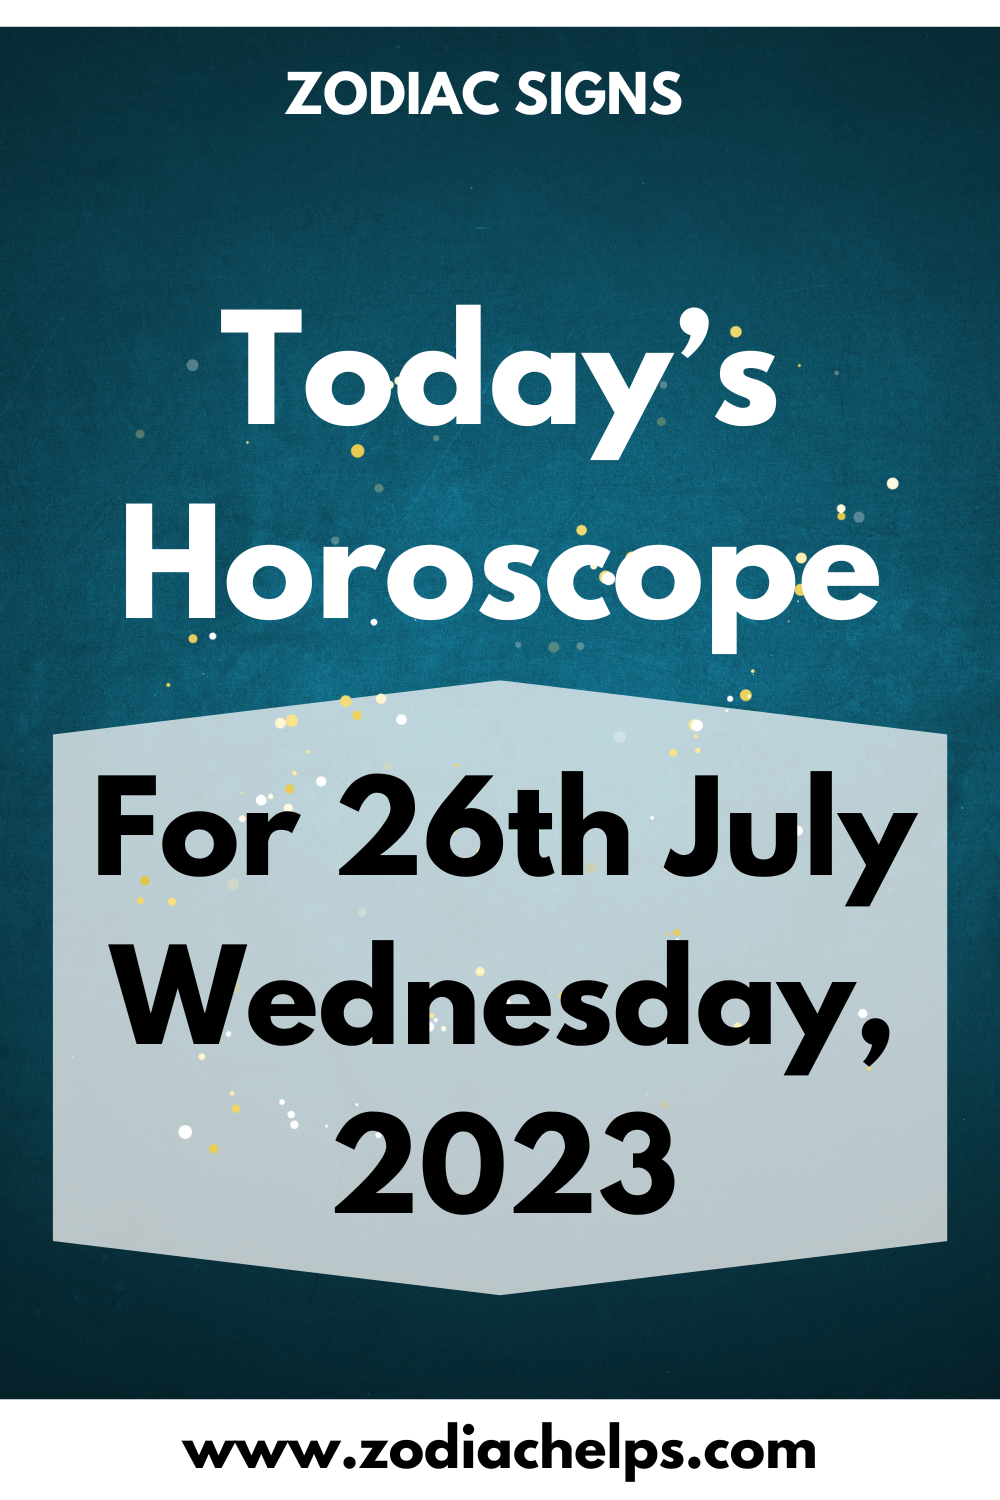 Today’s Horoscope for 26th July Wednesday, 2023